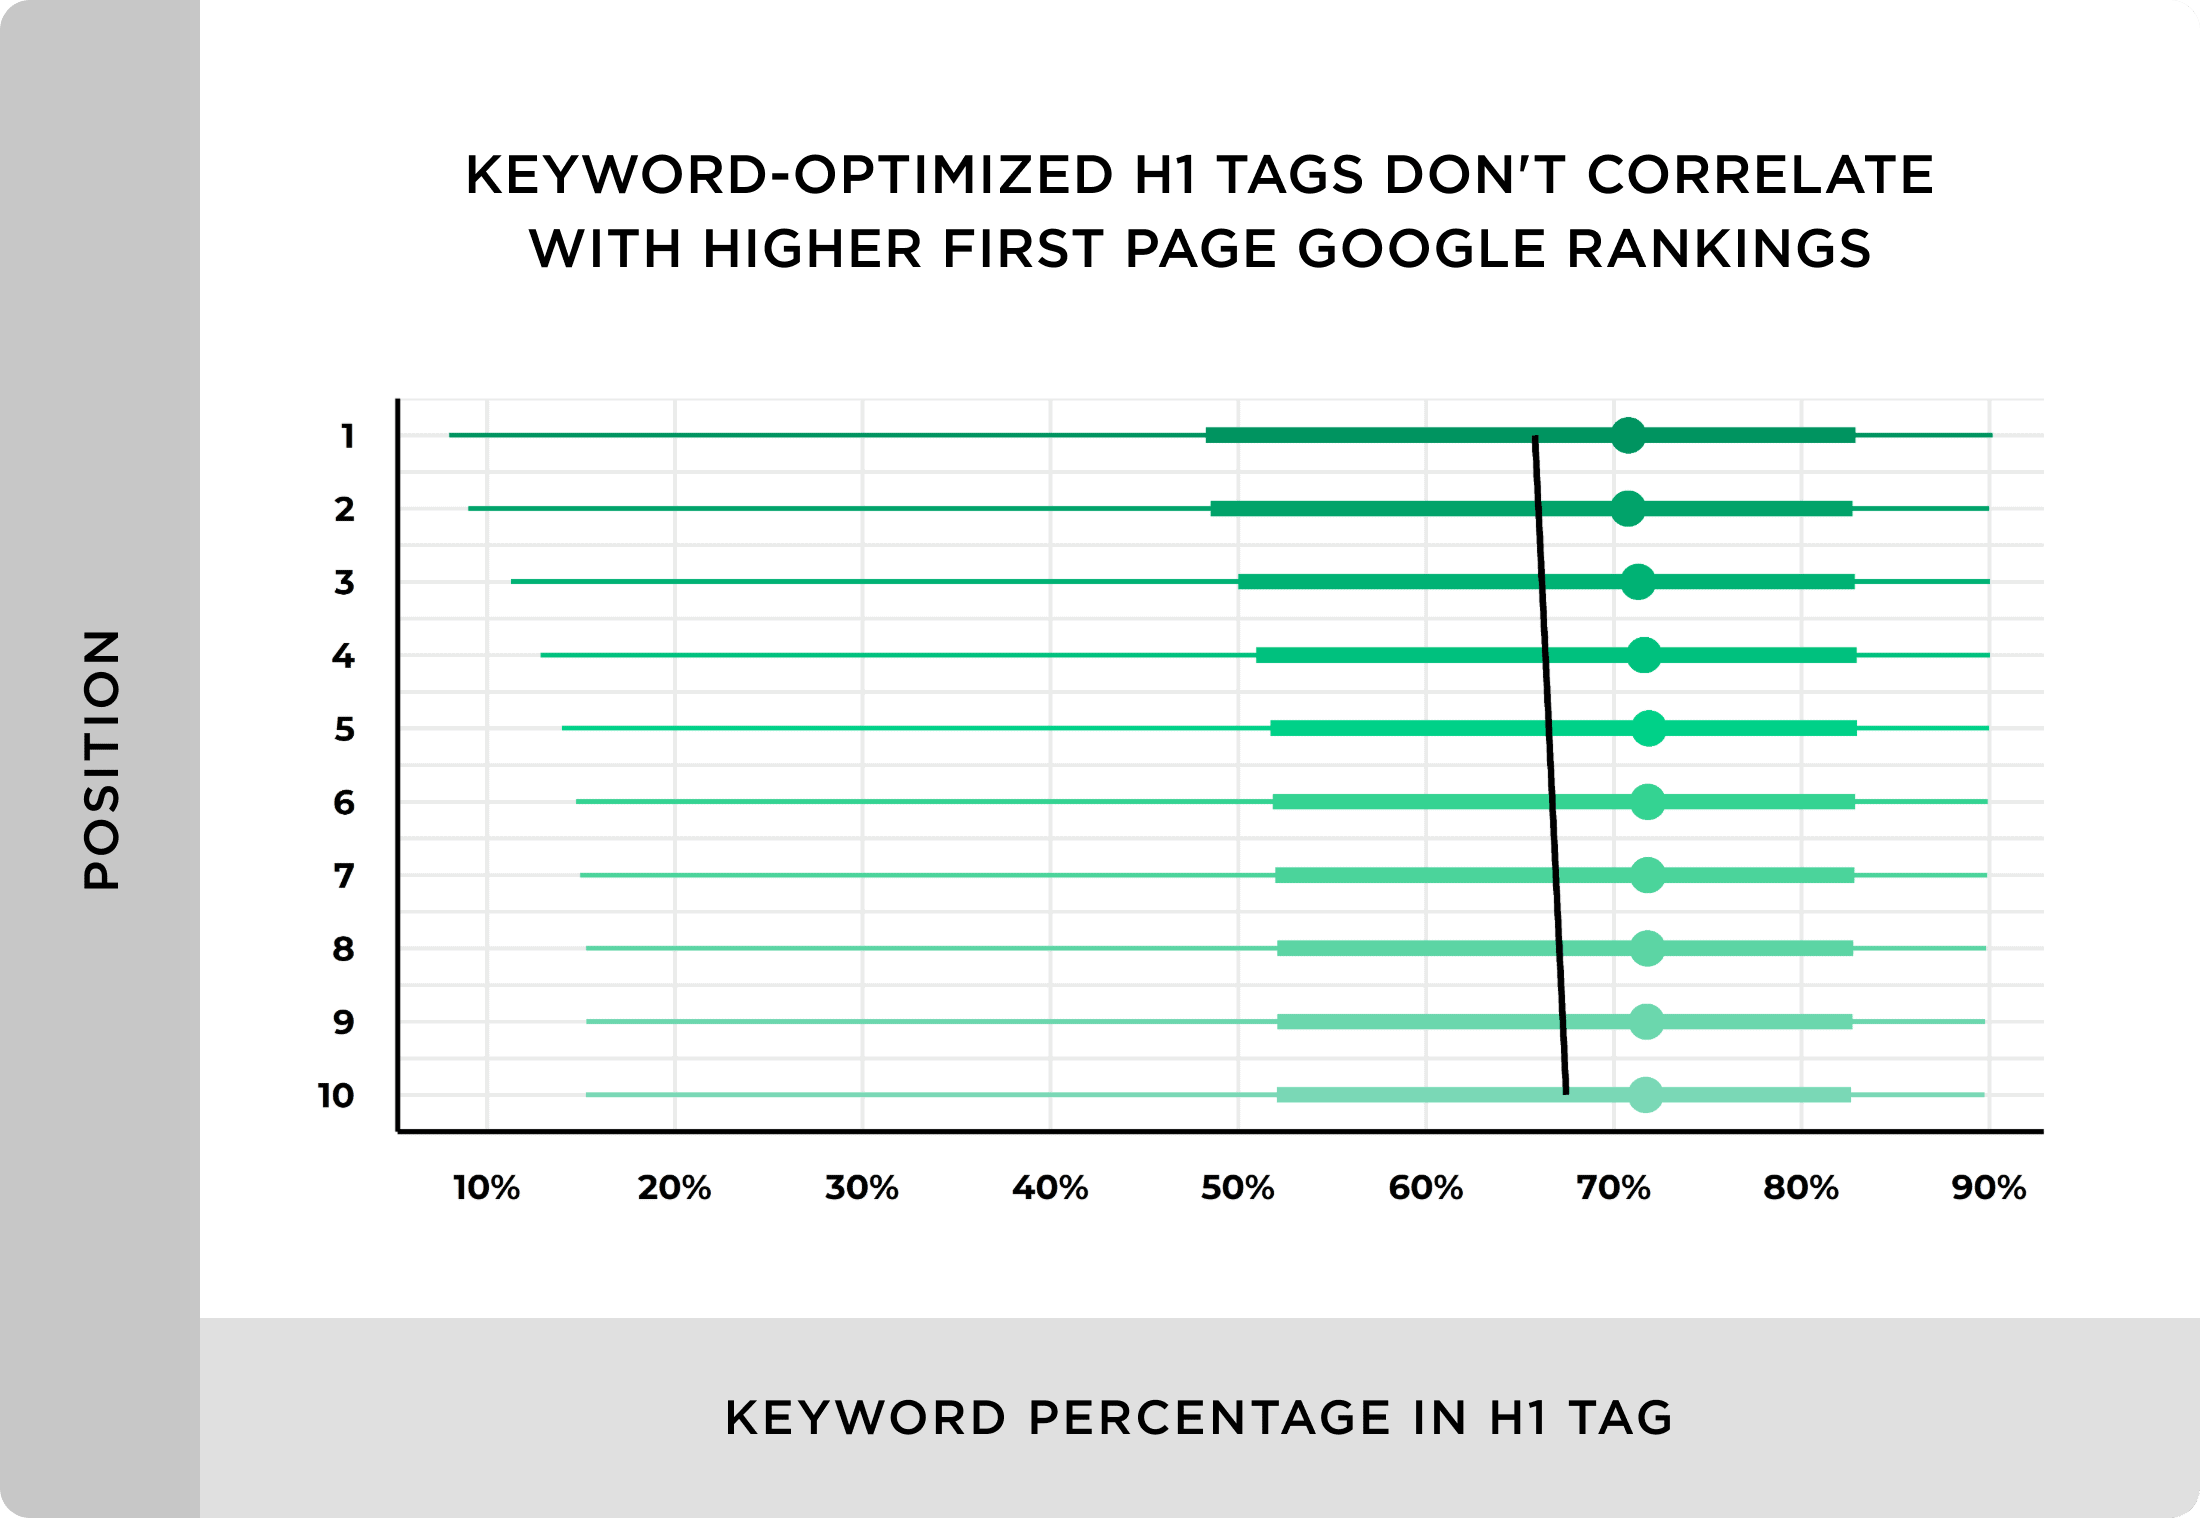 Keyword optimized H1 tags don't correlate with higher first page Google rankings